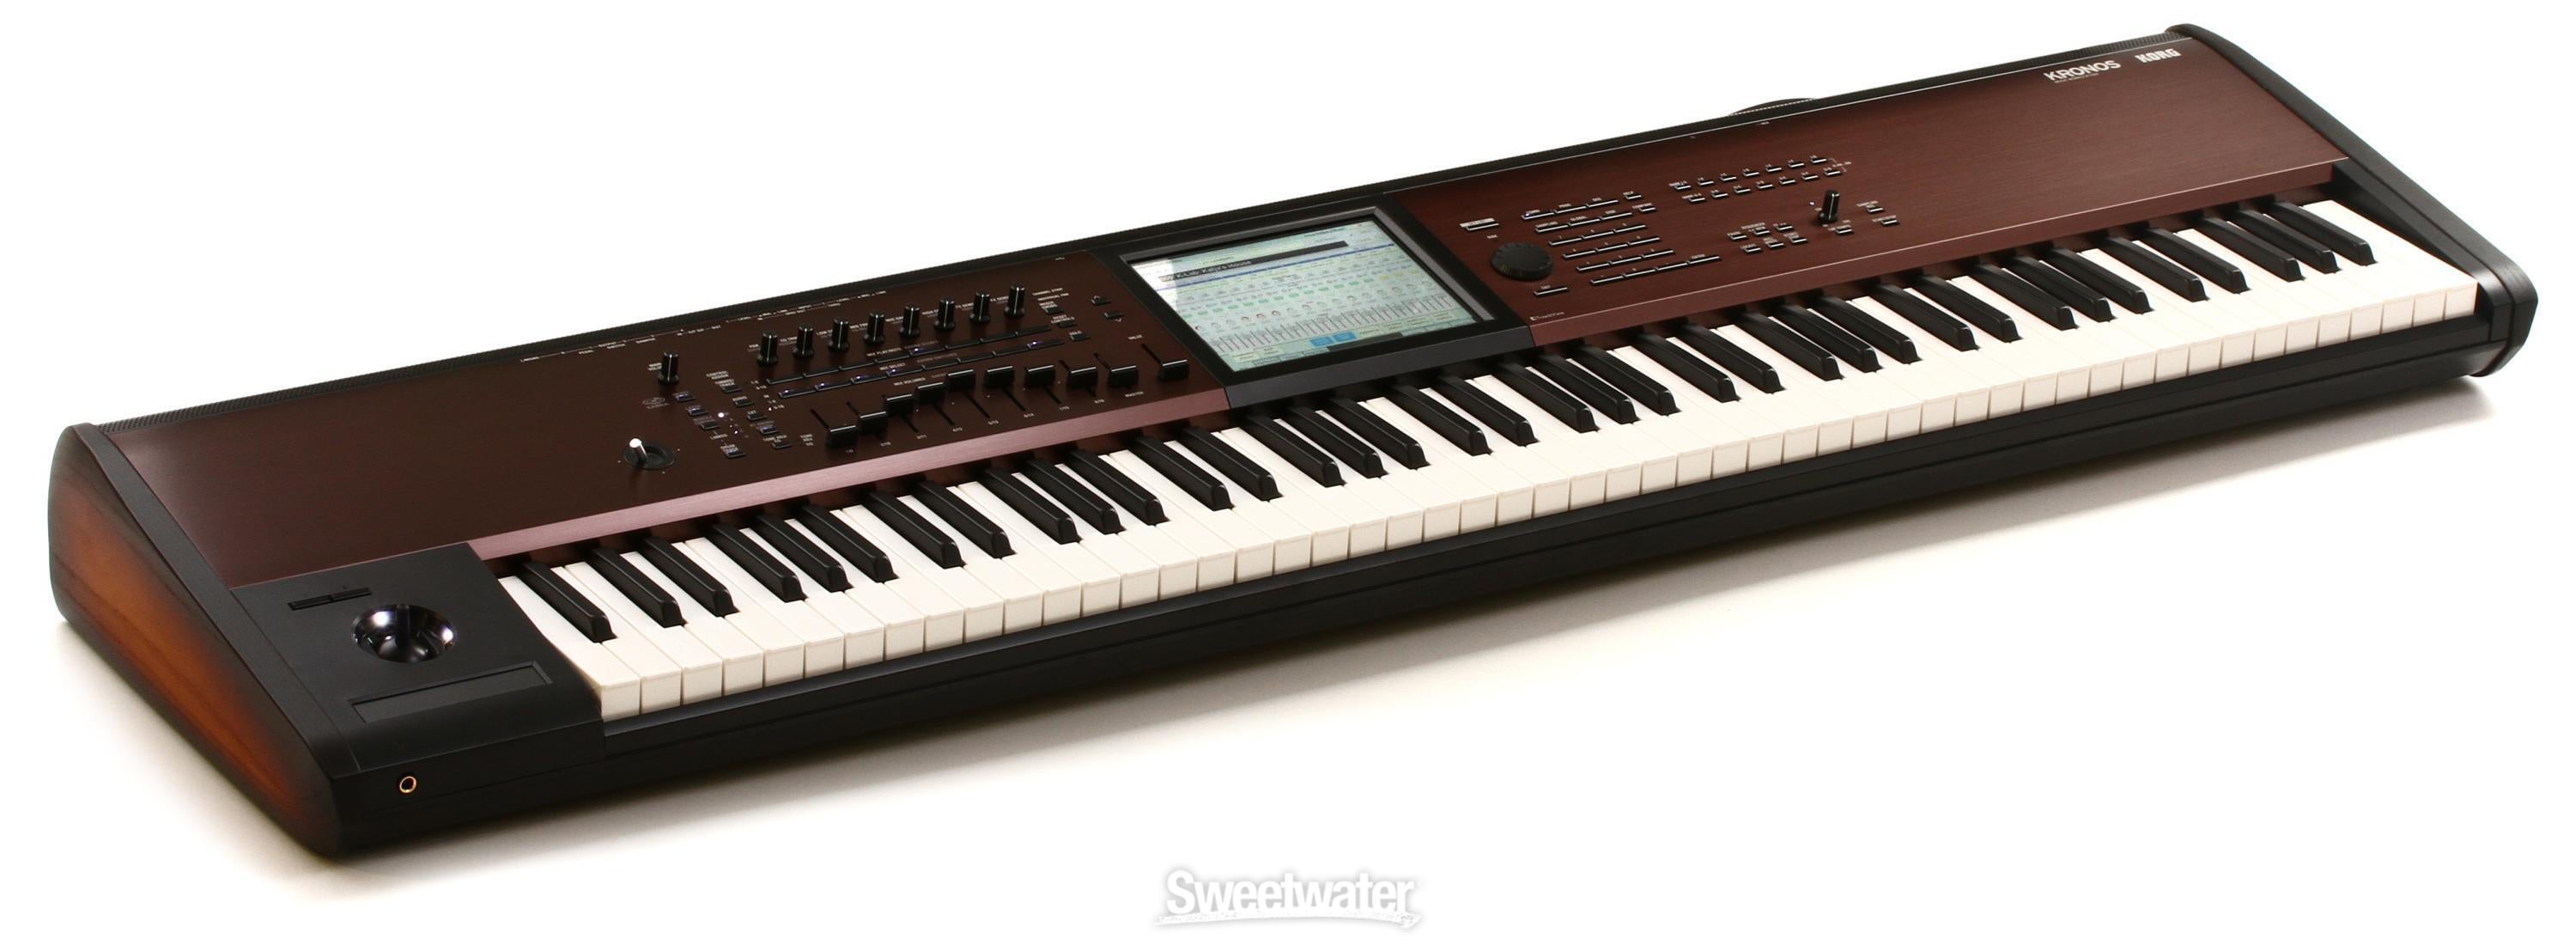 Korg Kronos LS 88-key Synthesizer Workstation Reviews | Sweetwater